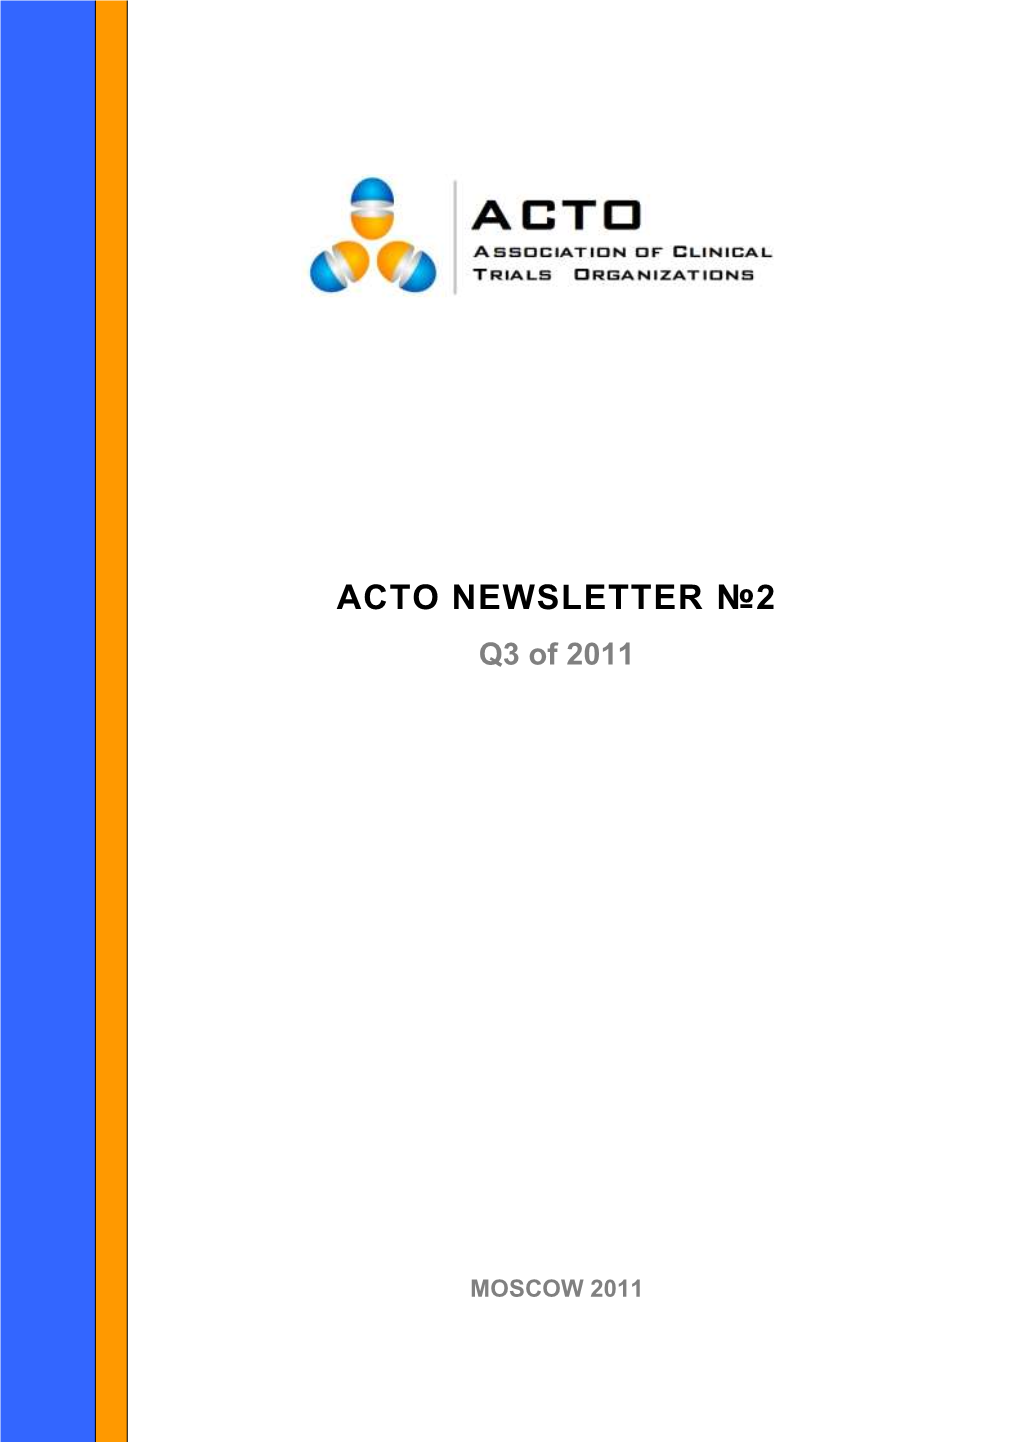 ACTO Newsletter №2, Q3 of 2011